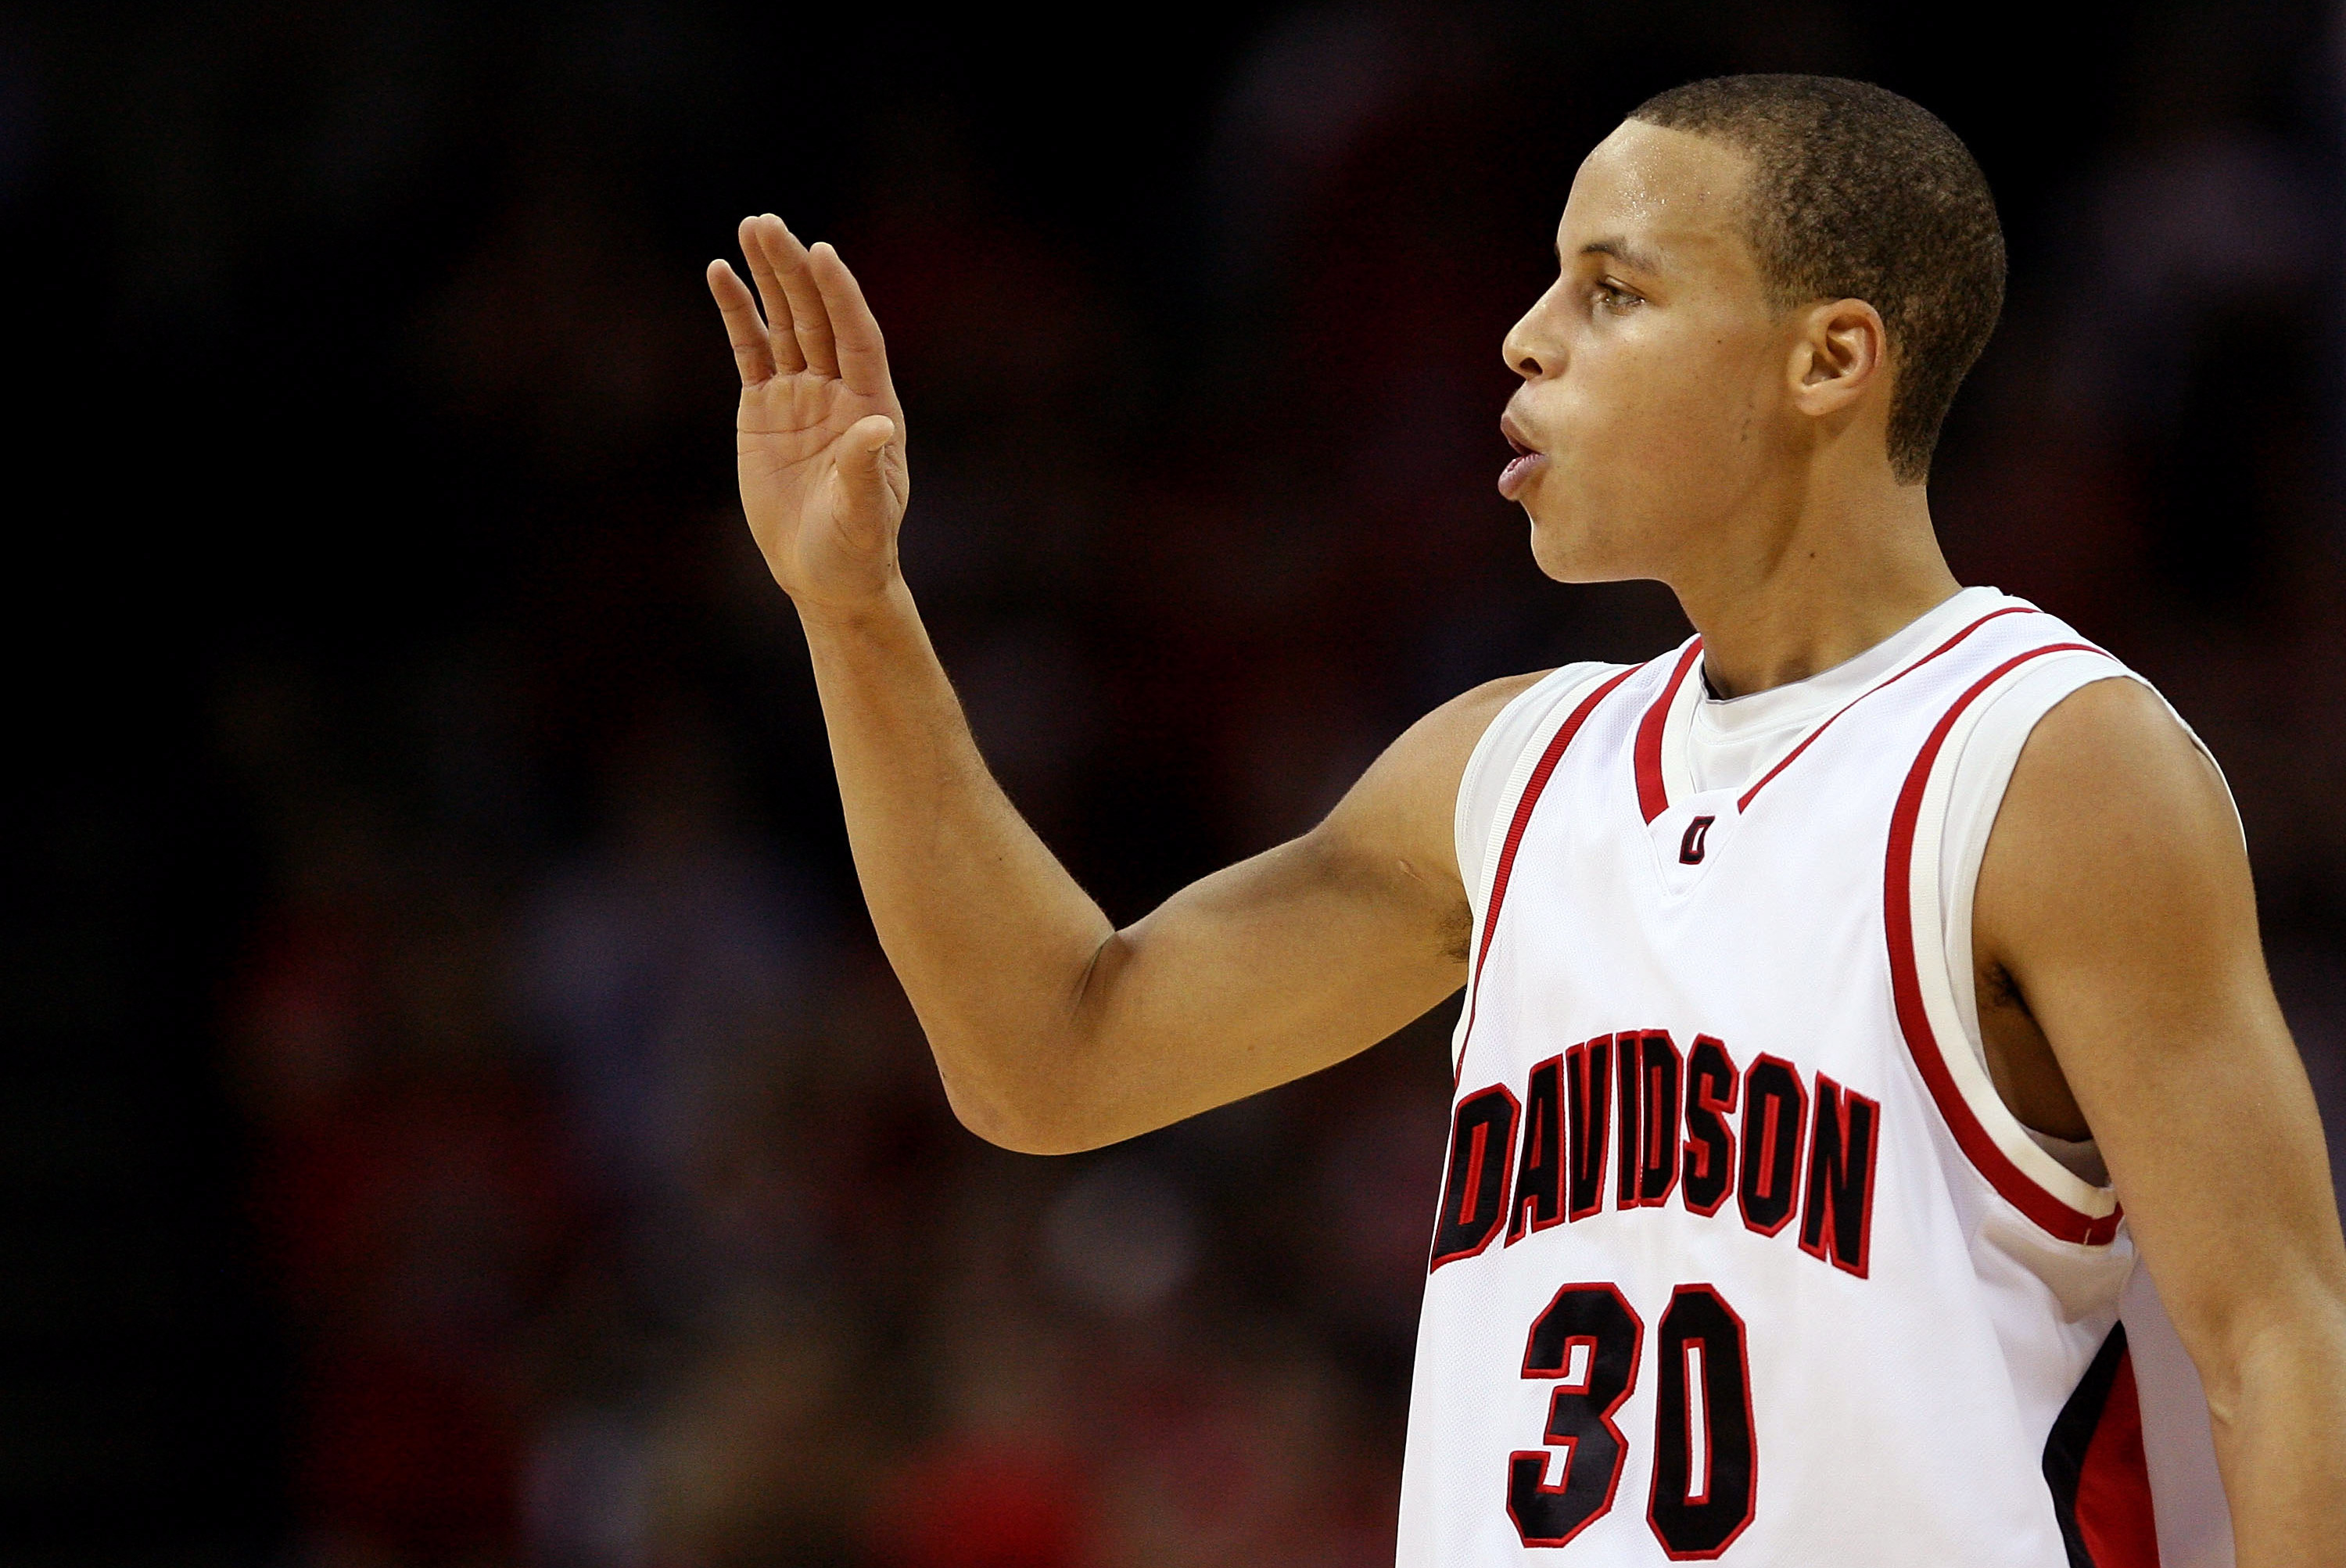 NBA star Steph Curry graduates from Davidson College